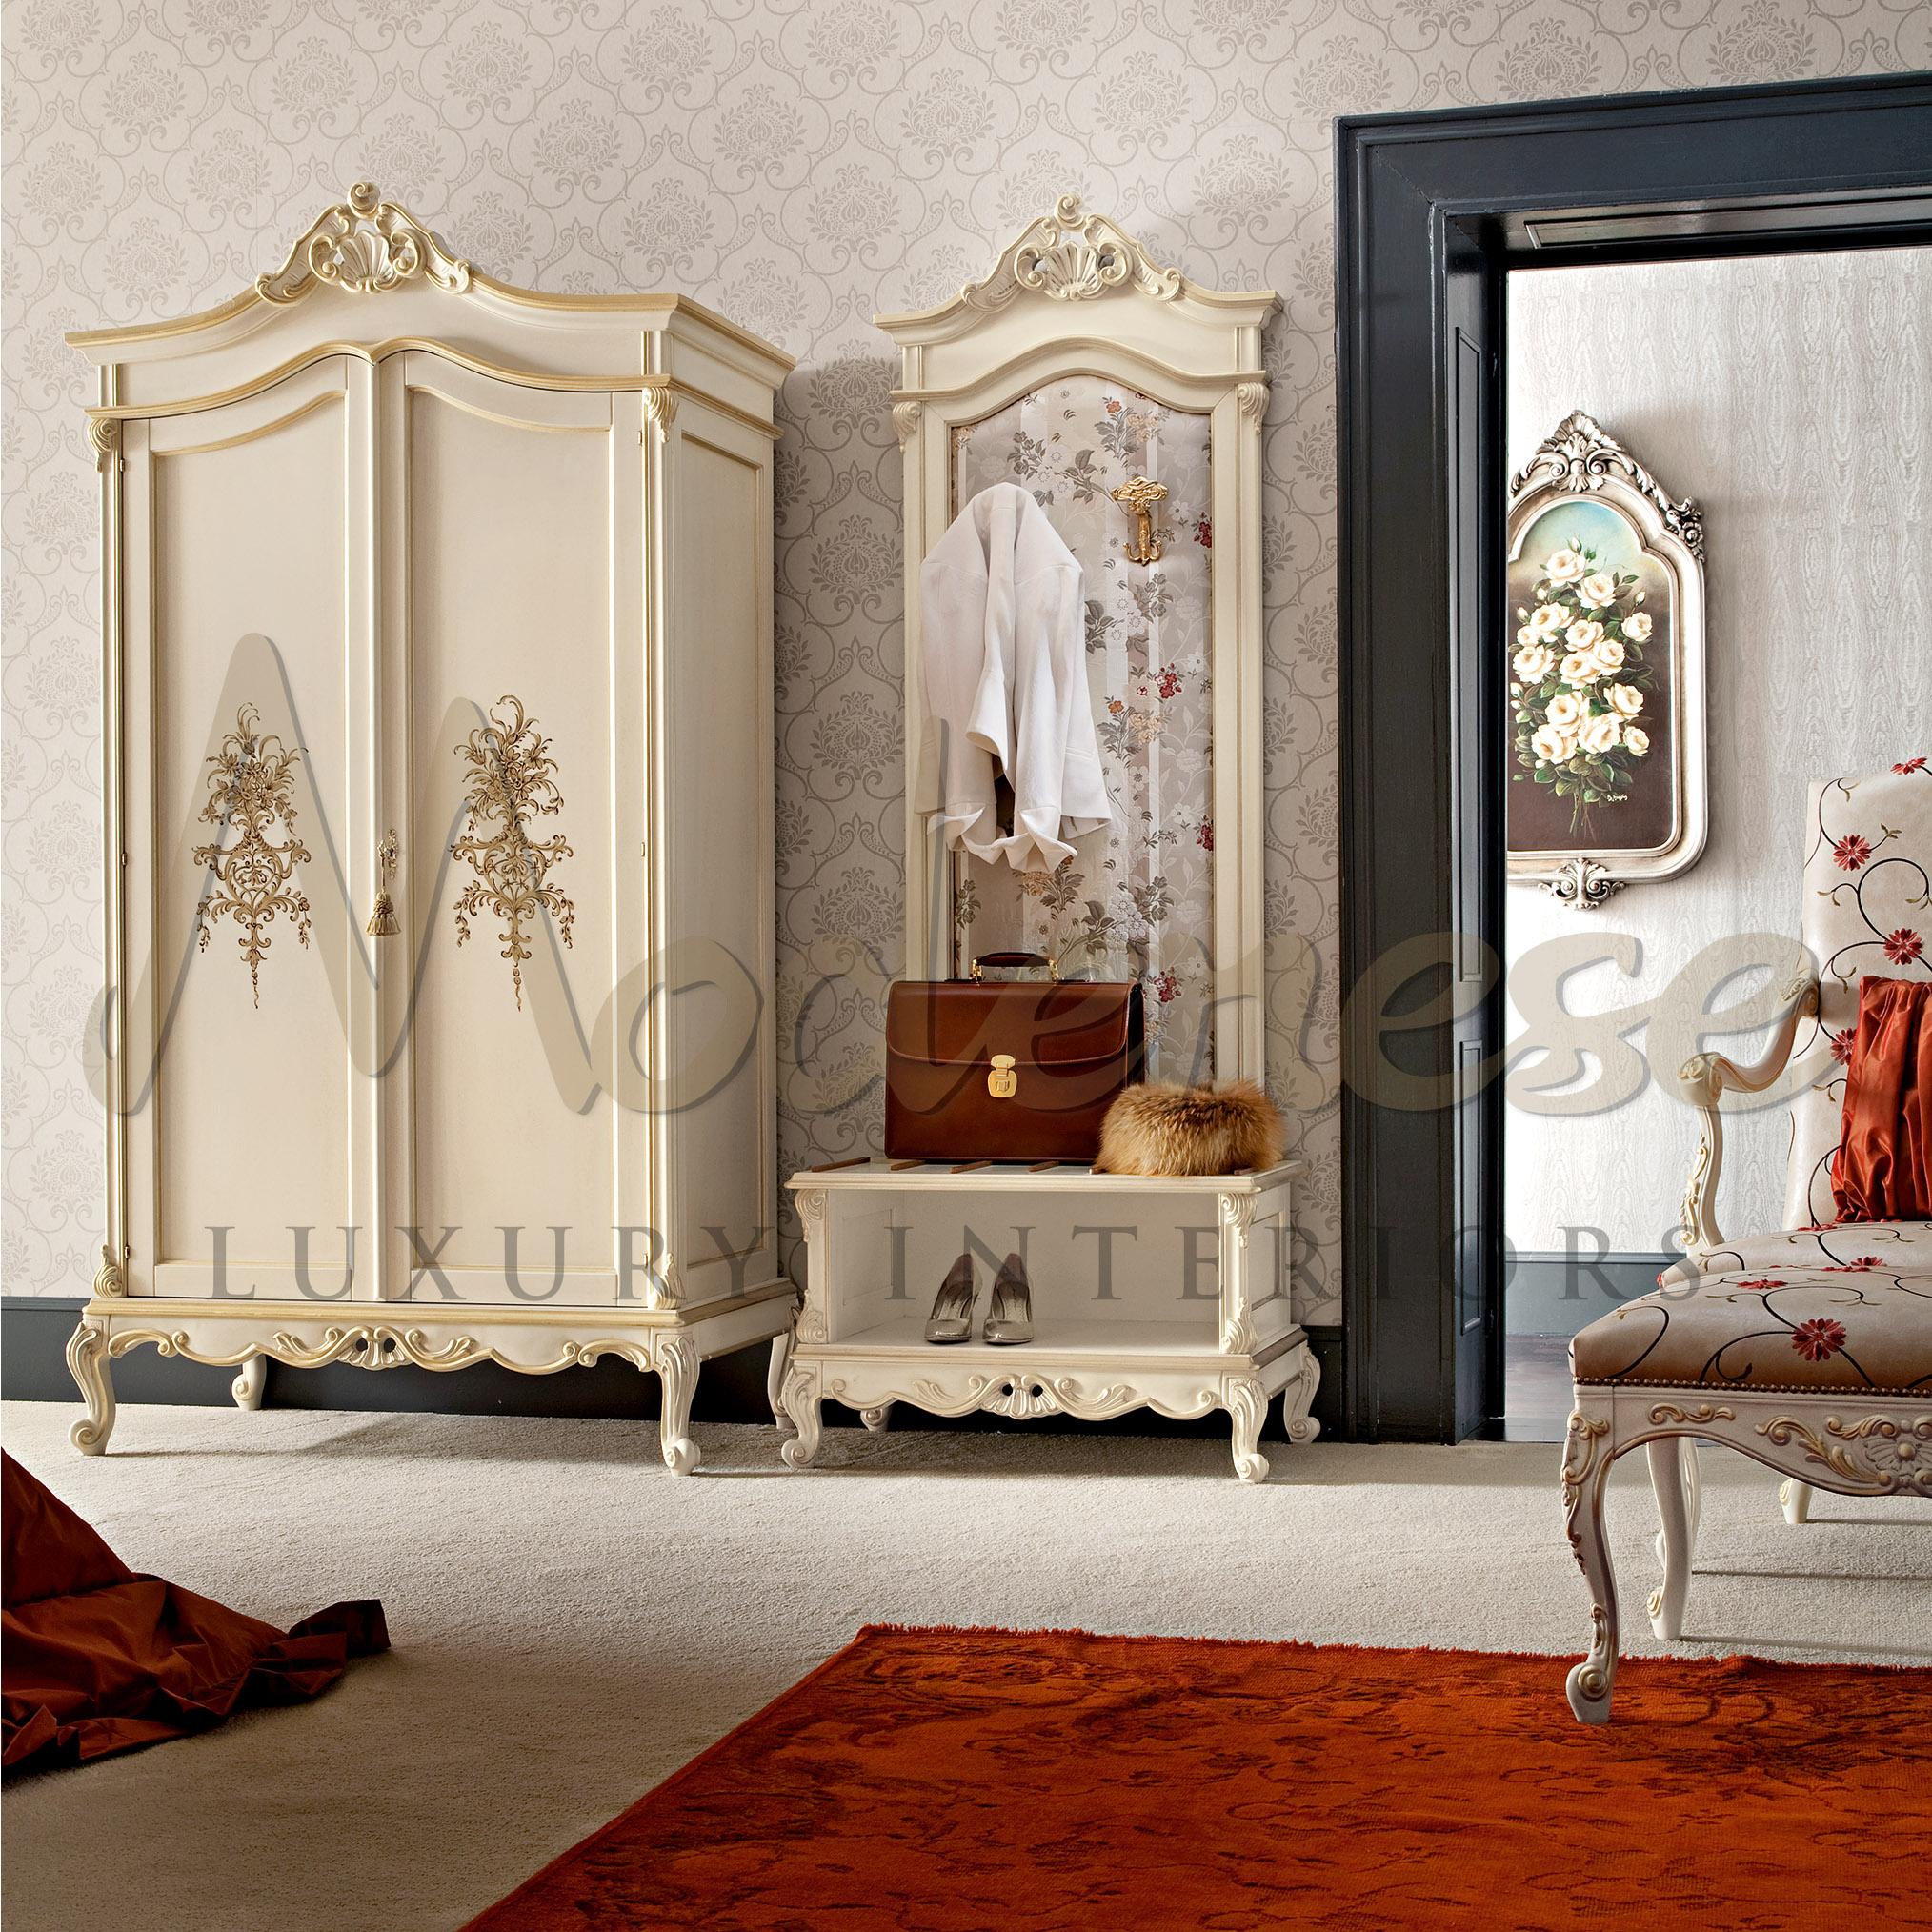 Exquisitely designed neoclassical wardrobe with hand-made carvings and handdecorated gold leaf applications by the Italian furniture brand Modenese Gastone Interiors. This elegantly shaped Casa Nova wardrobe - ideal for classical and rococo bedrooms